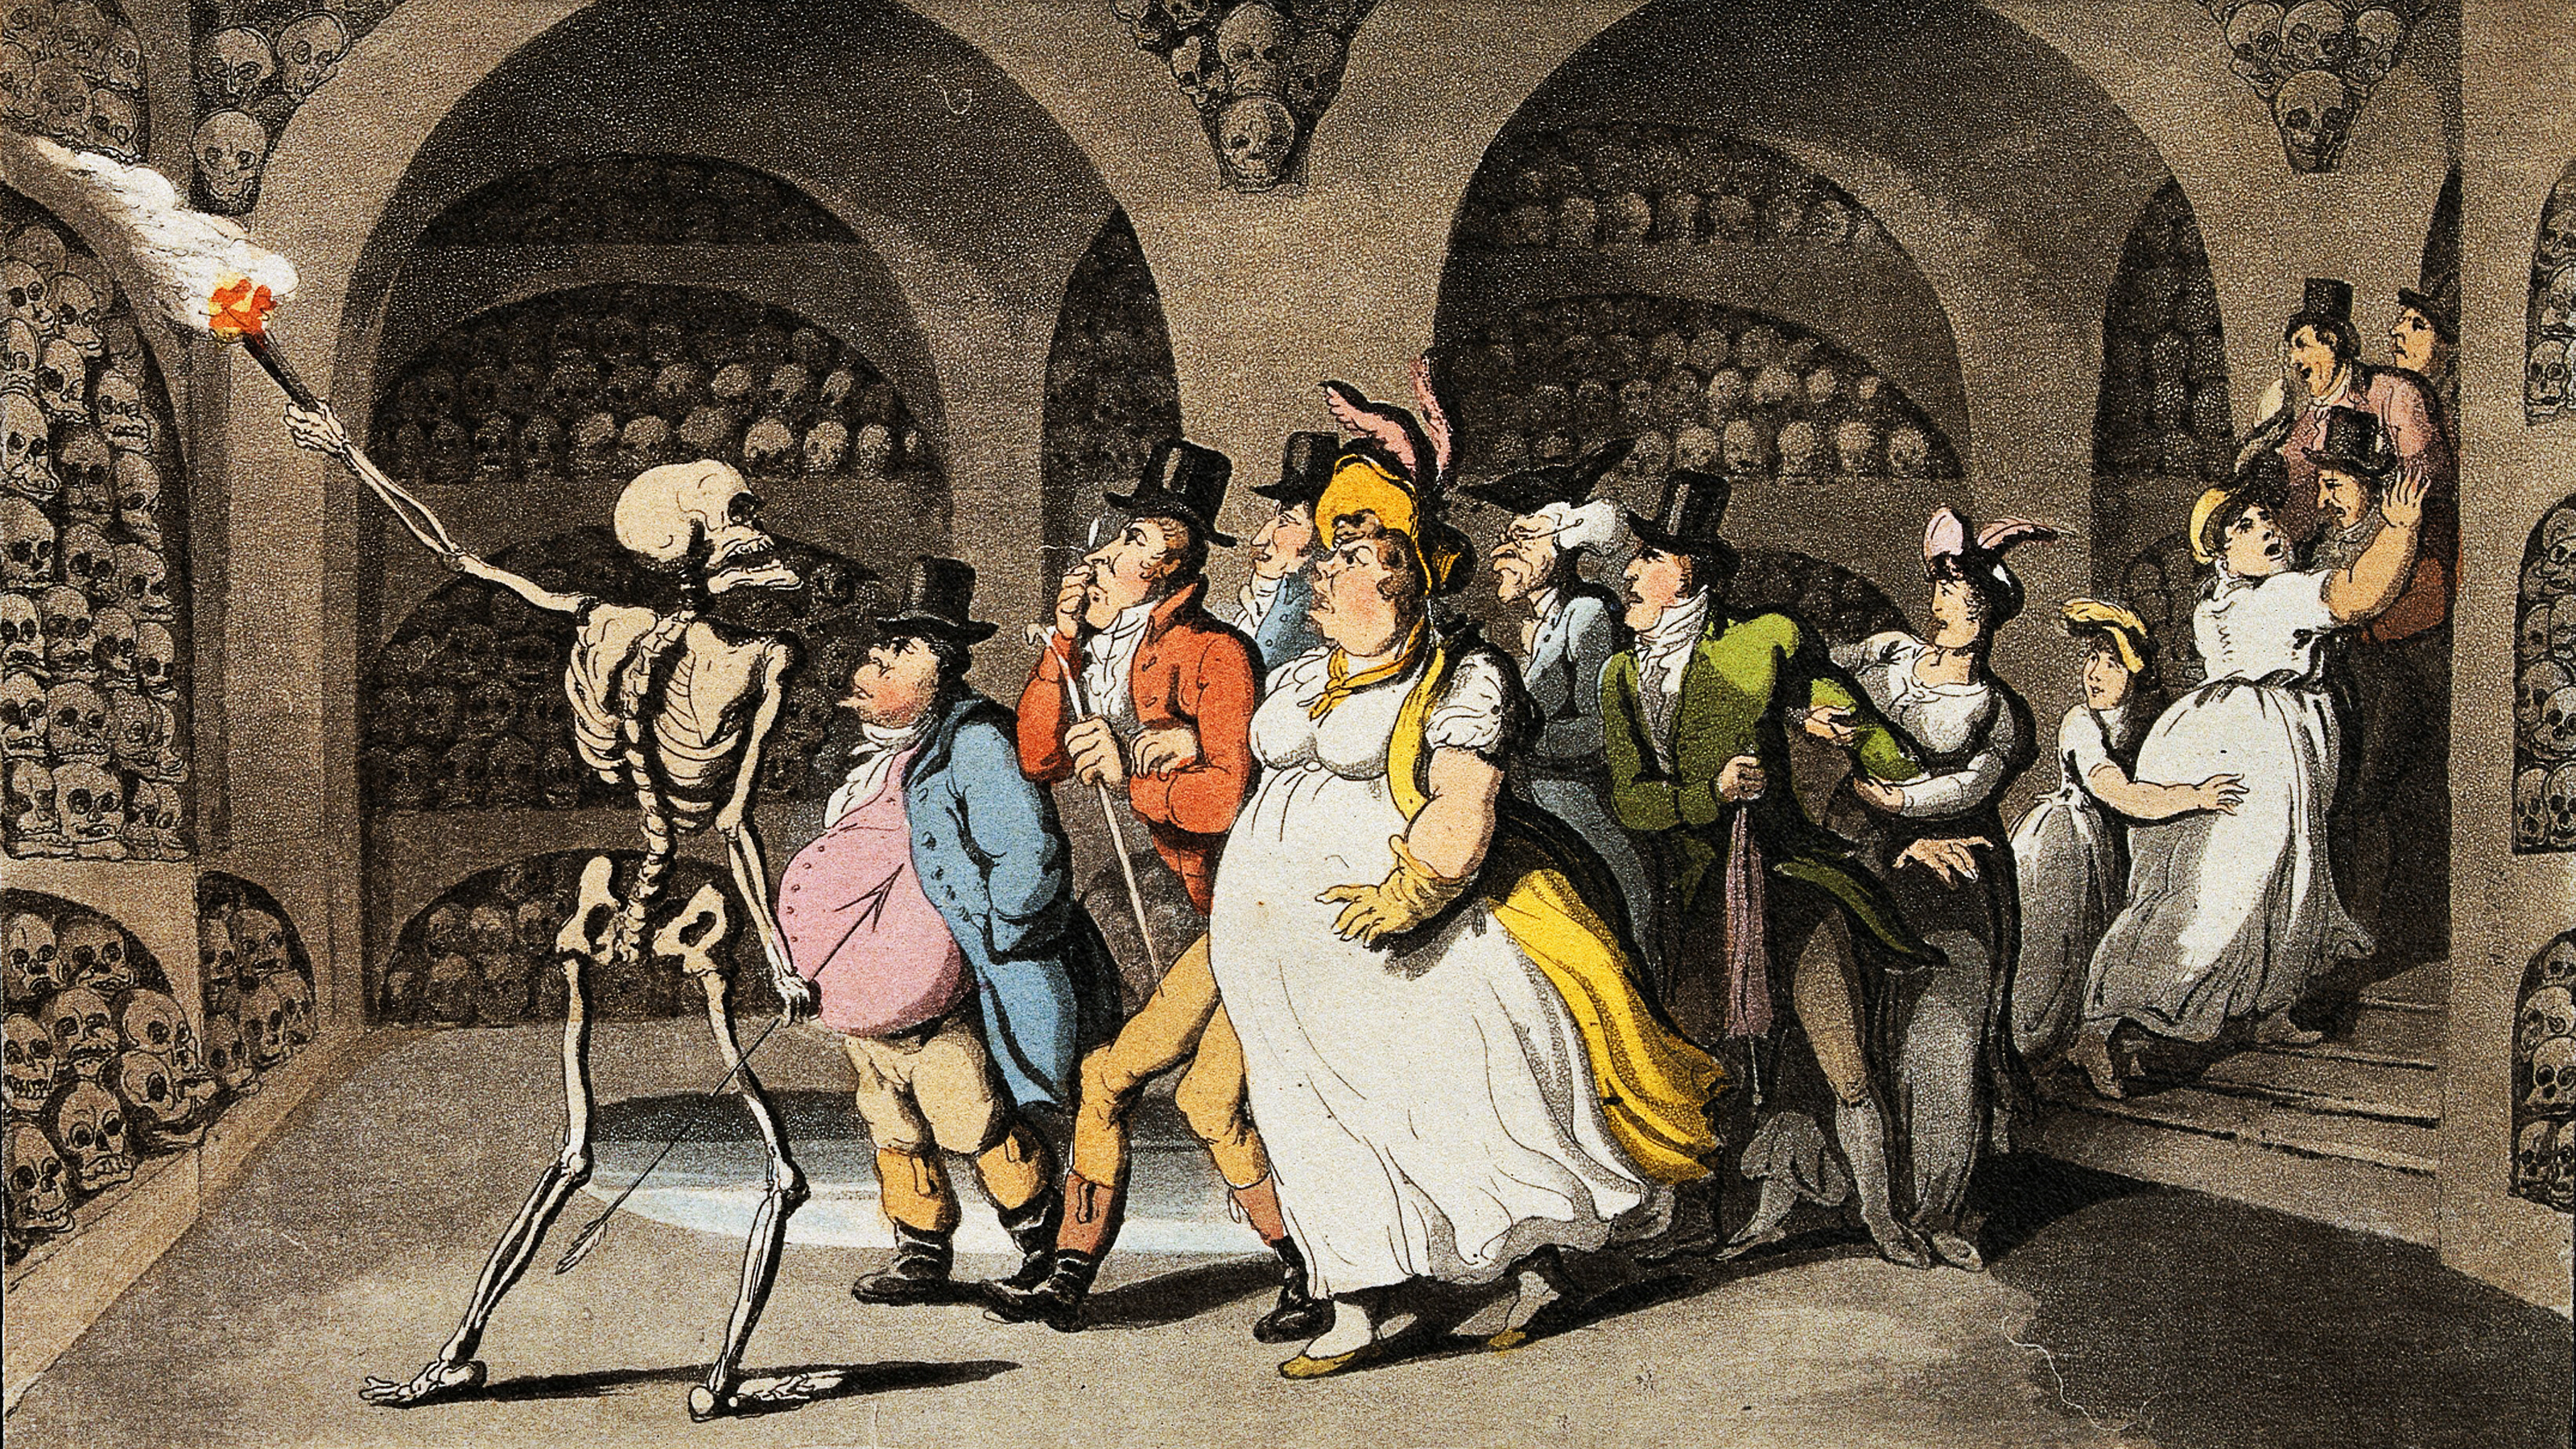 A group of people engaged in dark humor while standing around a skeleton.